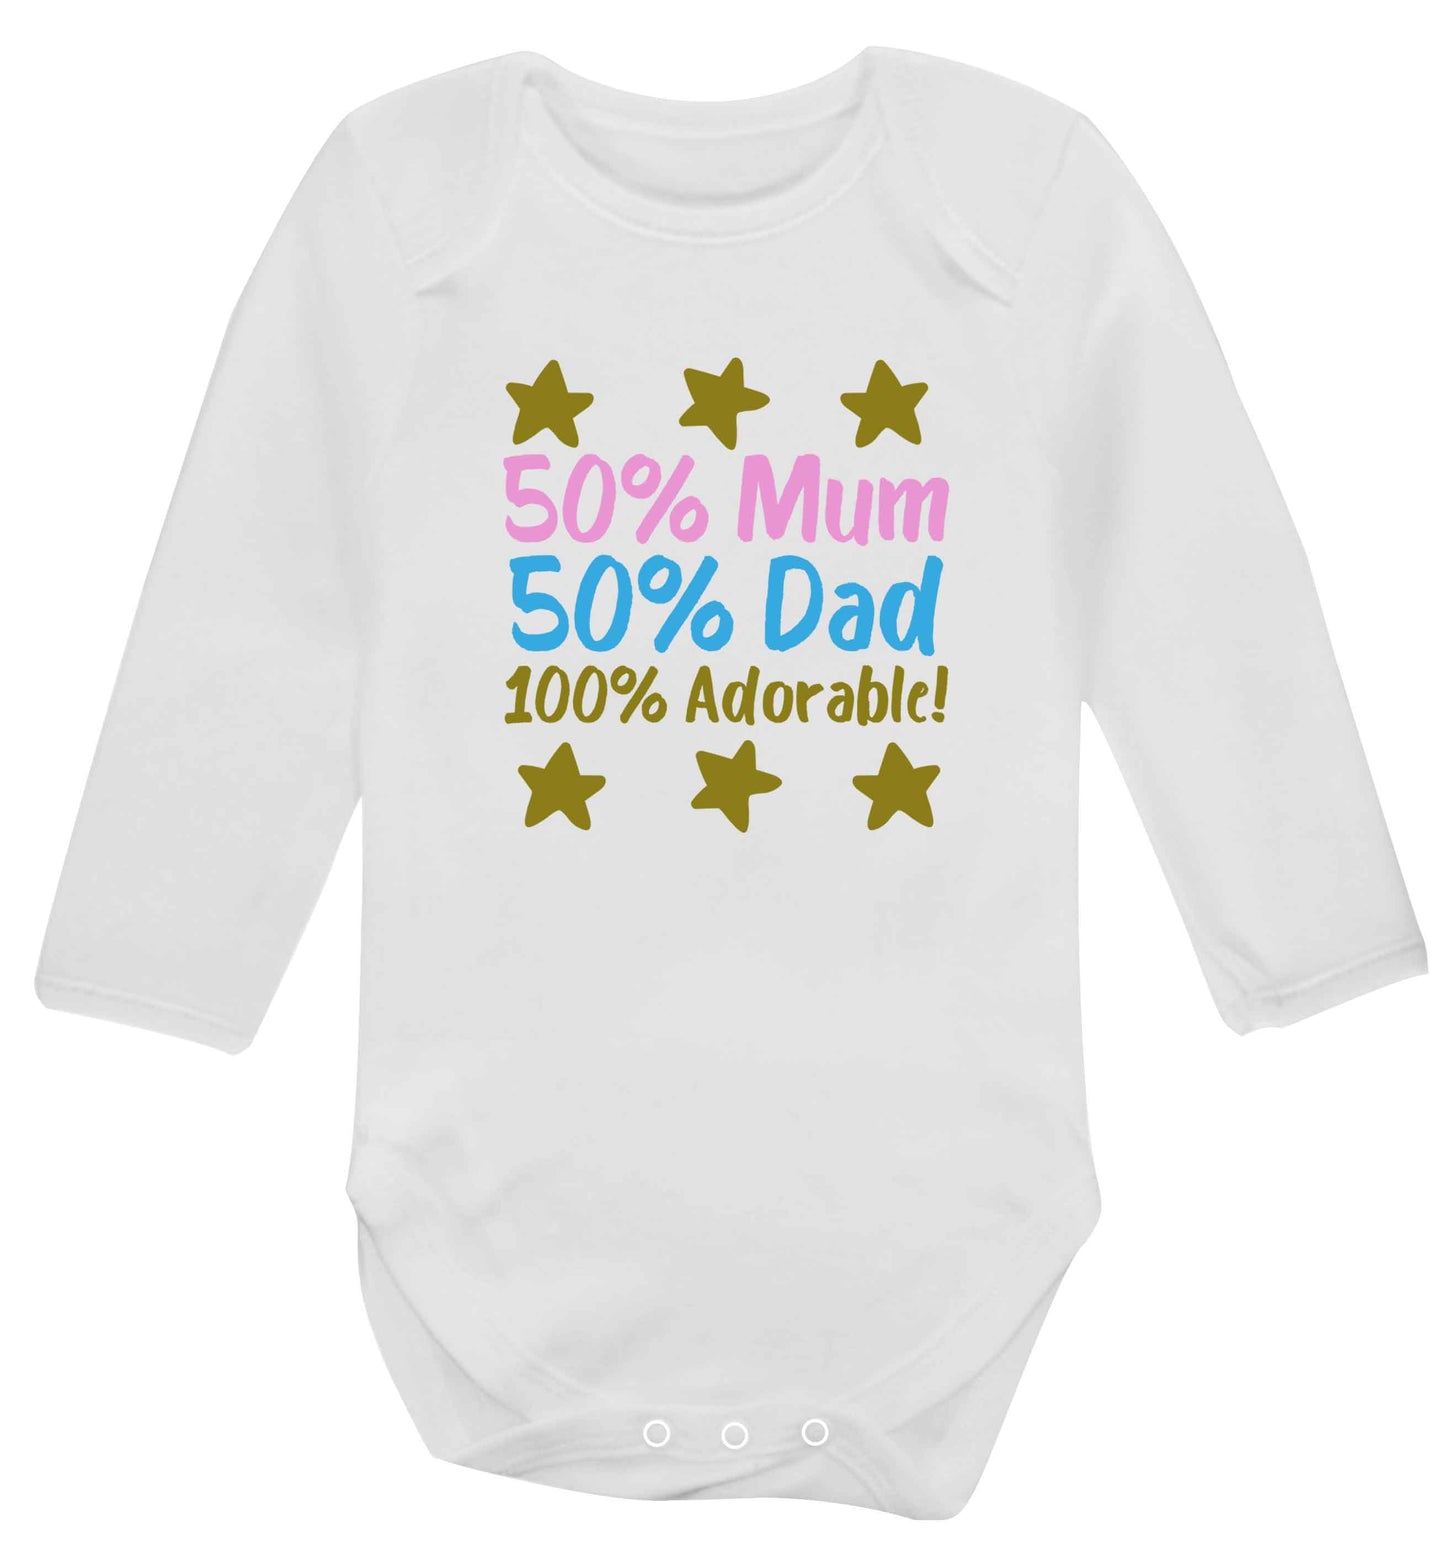 50% mum 50% dad 100% adorable baby vest long sleeved white 6-12 months